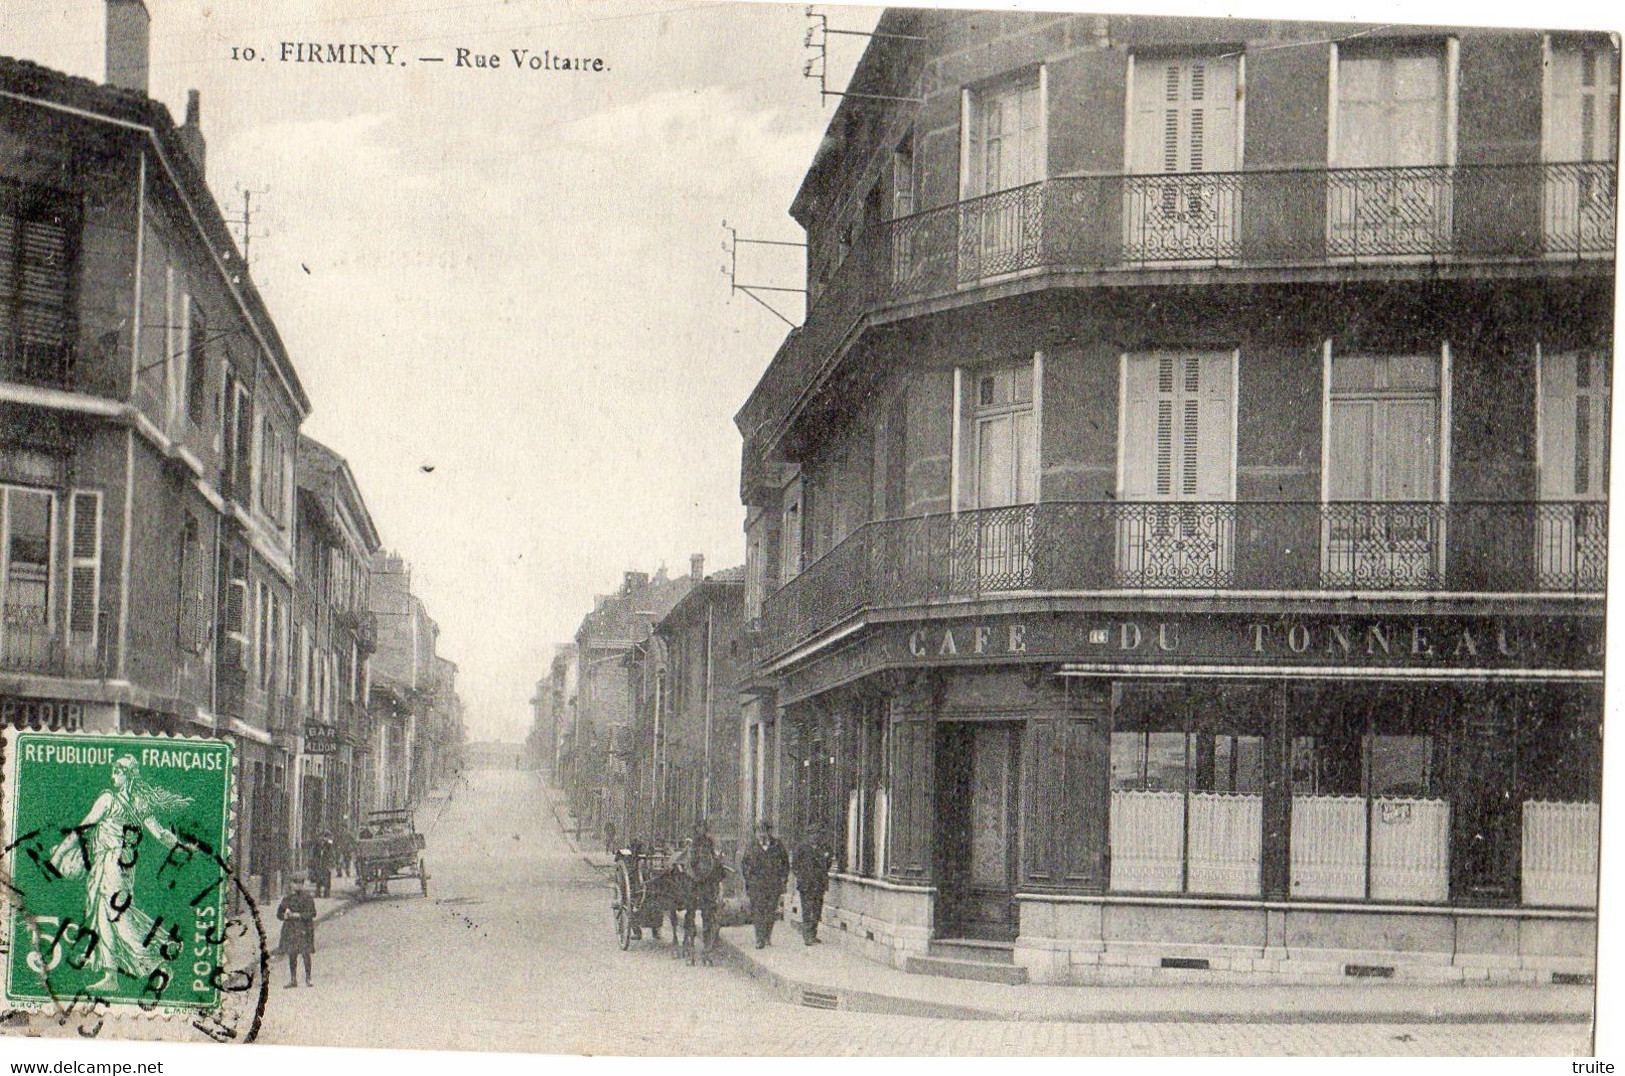 FIRMINY RUE VOLTAIRE - Firminy